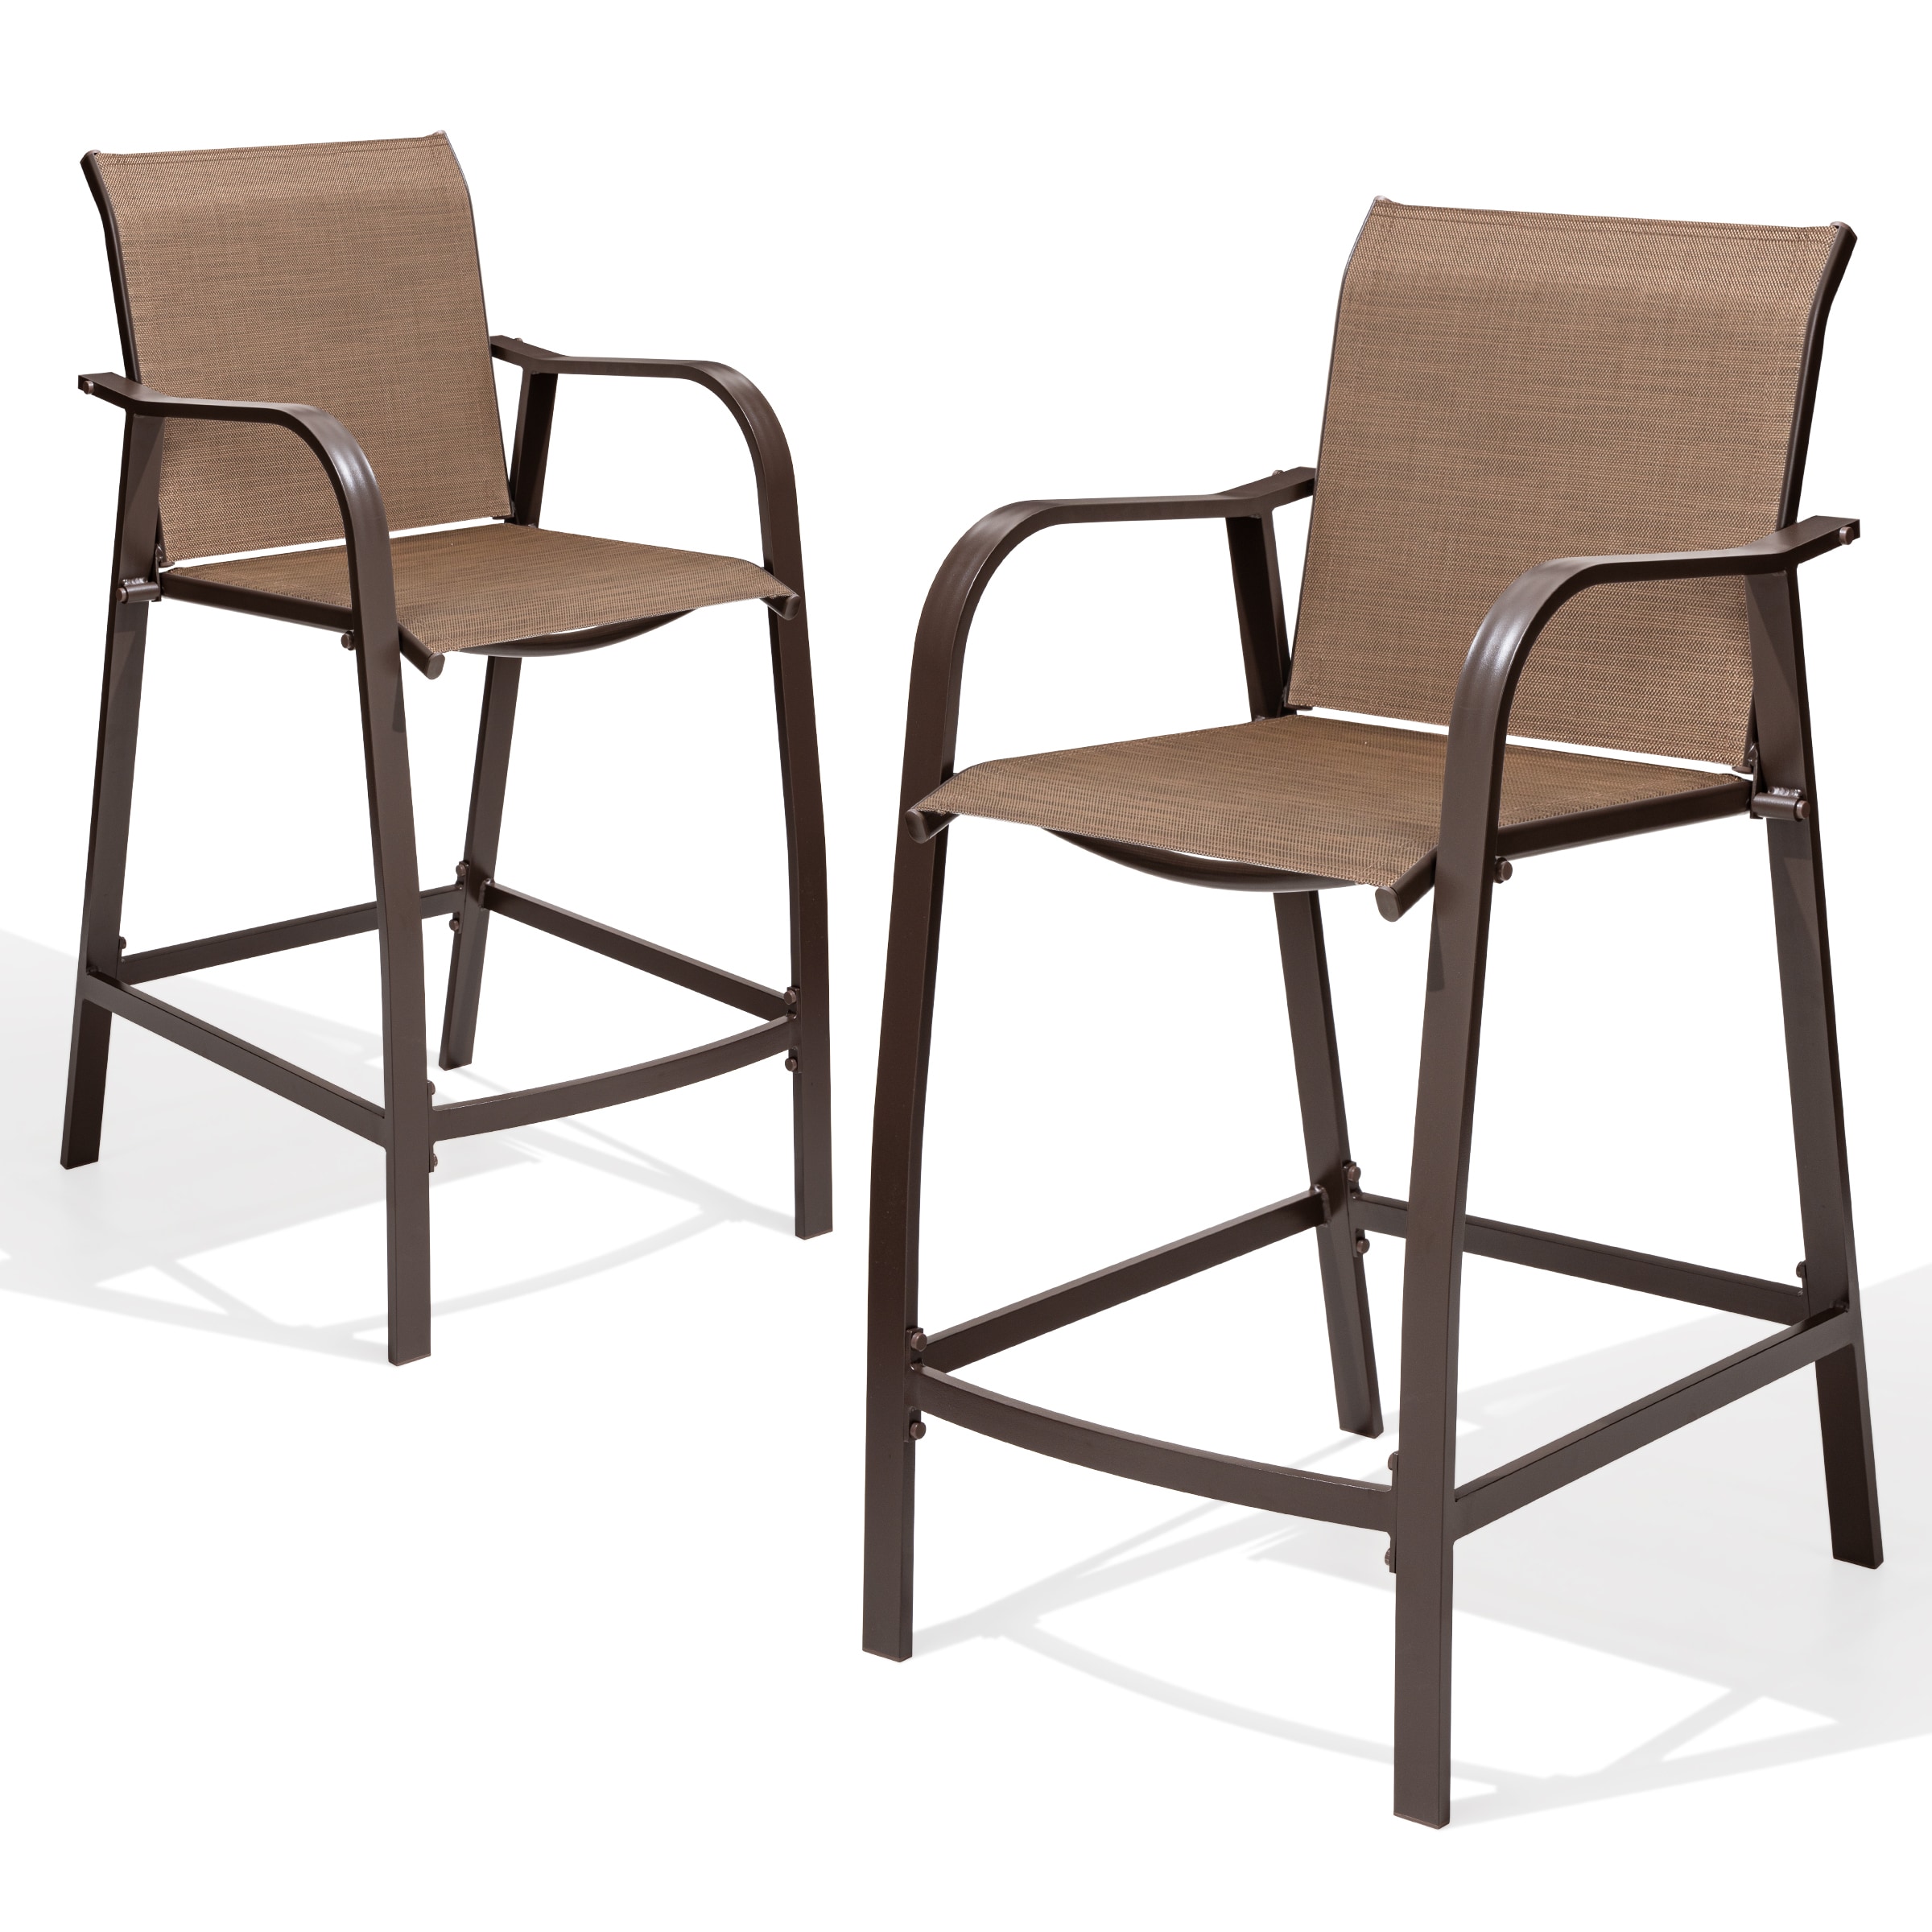 Black & Gray Crestlive Products Counter Height Bar Stools All Weather Patio Furniture with Heavy Duty Aluminum Frame in Antique Brown Finish for Outdoor Indoor 4 PCS Set 